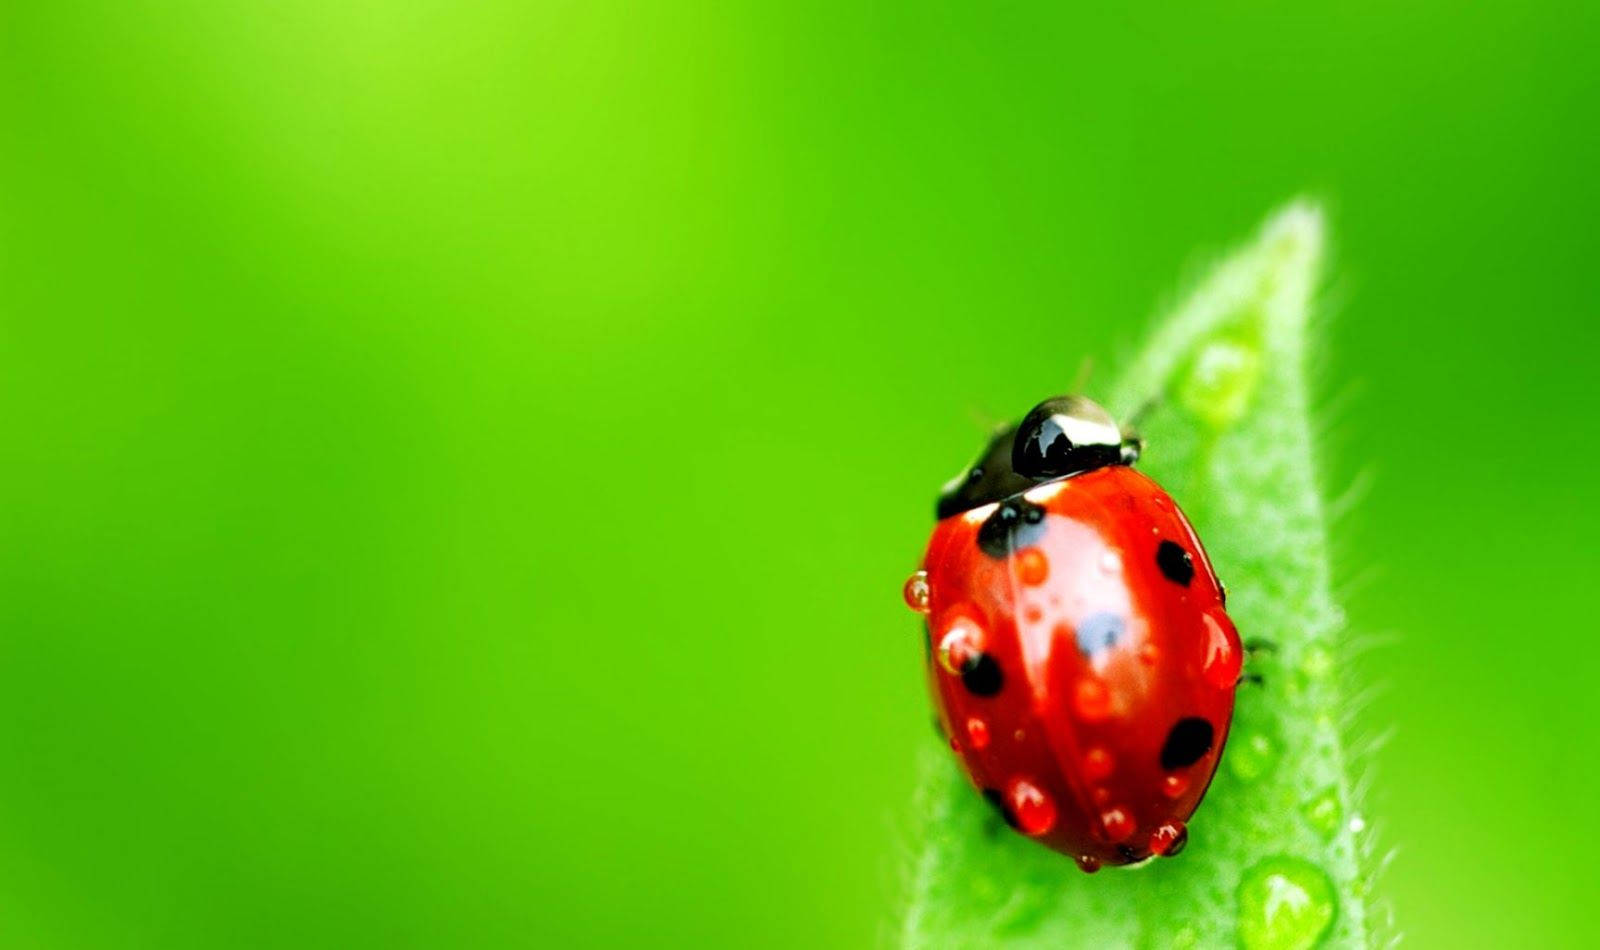 Insect Ladybug With Water Droplets Wallpaper